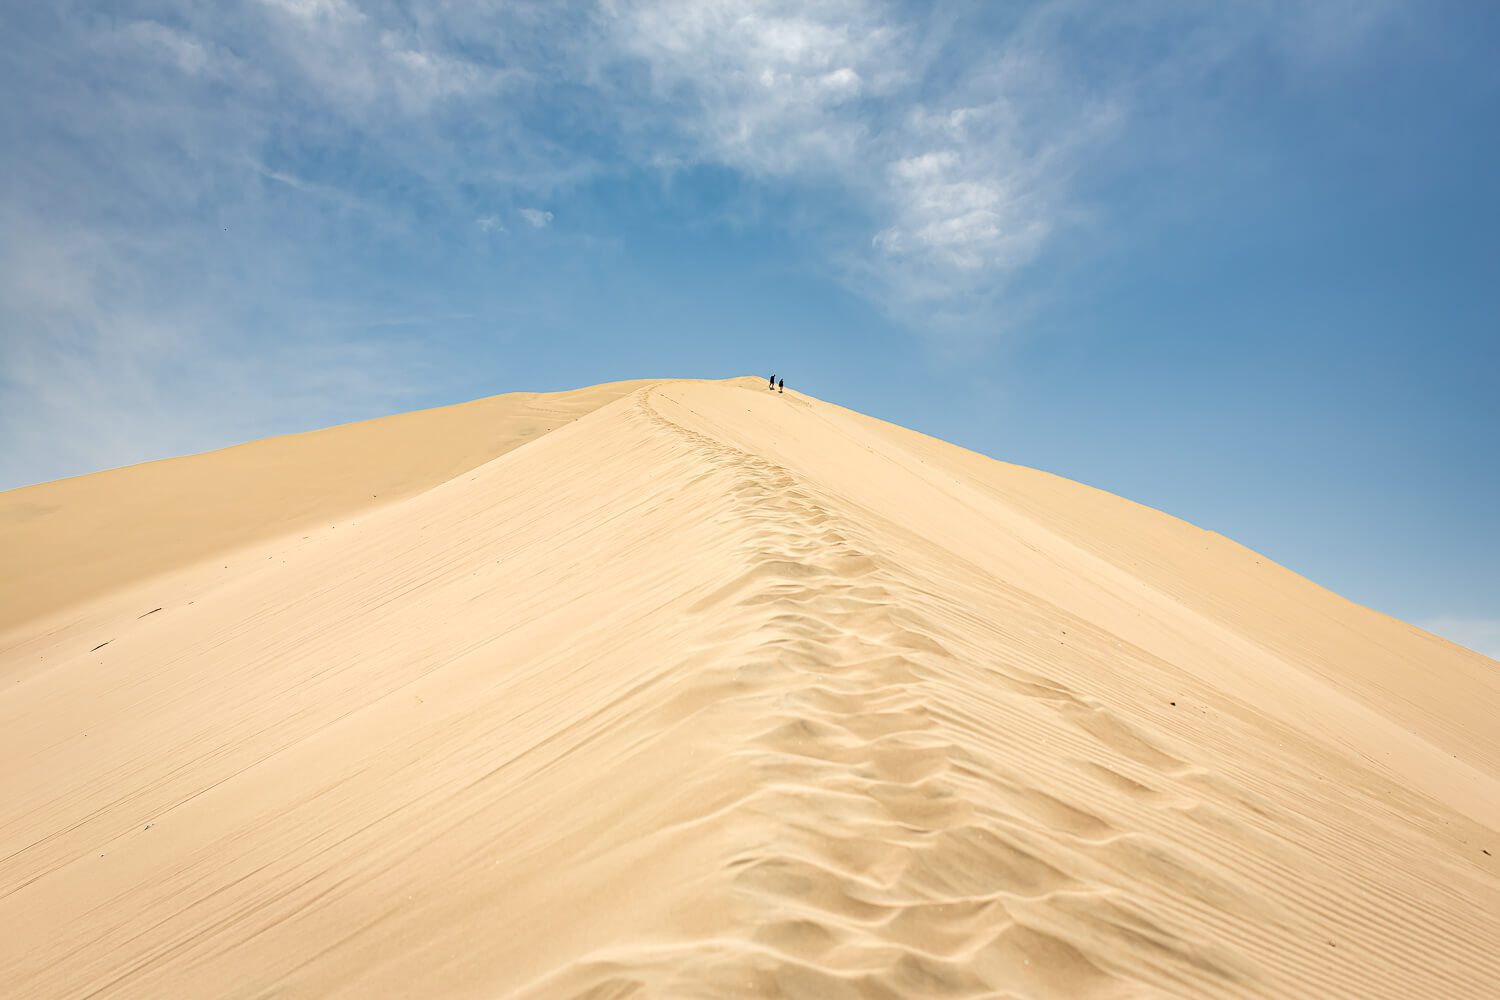 Hanging out in Huacachina sands dunes